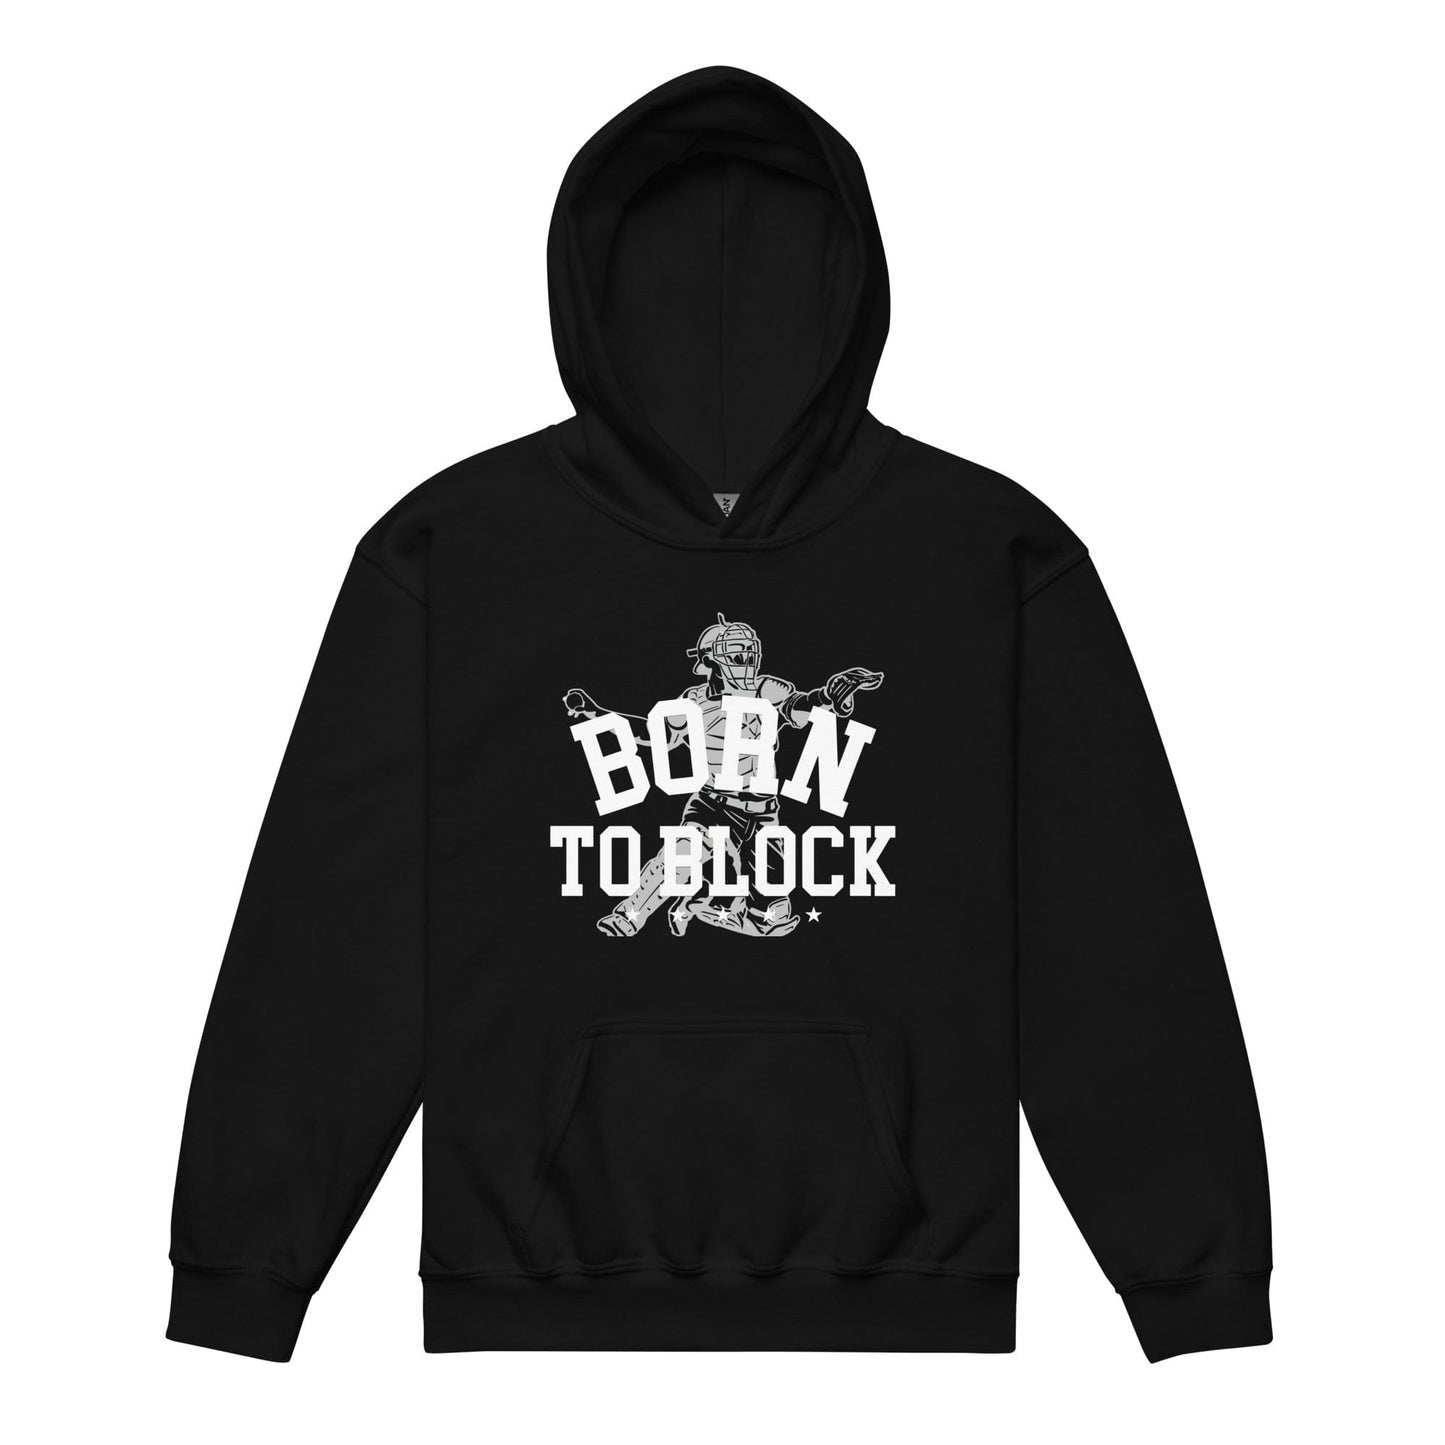 Born To Block - Youth Hoodie